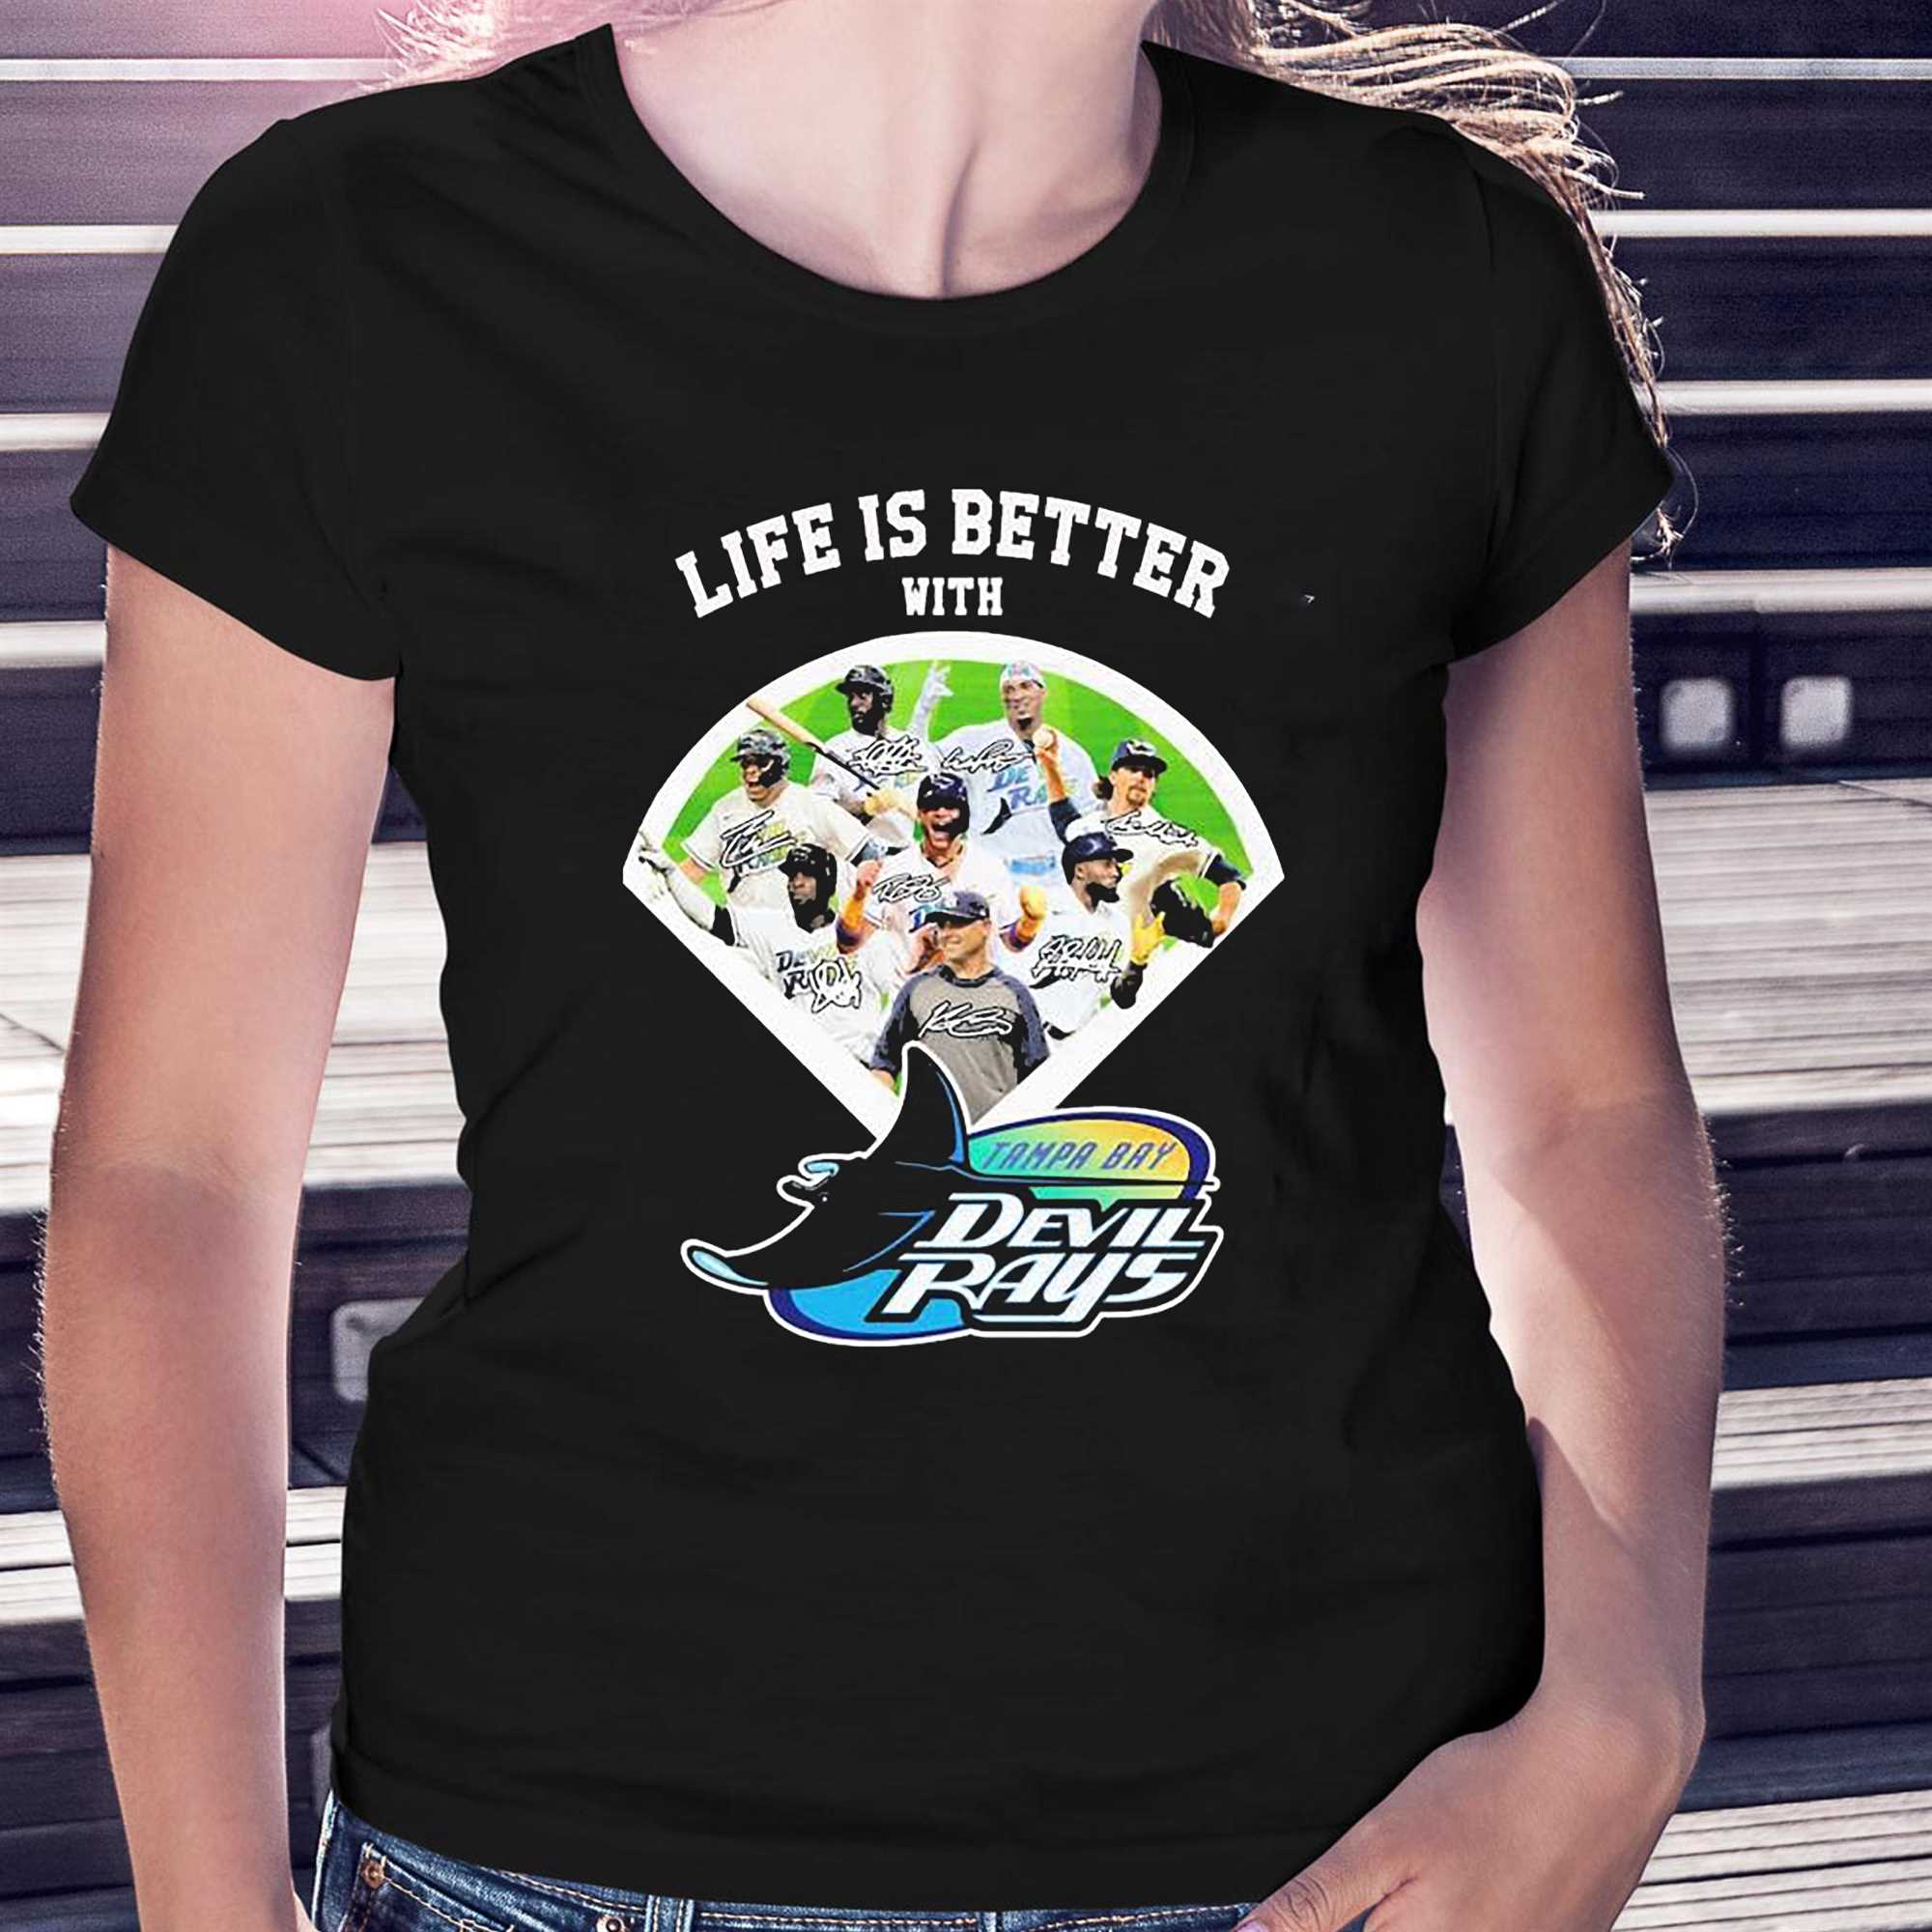 Life is better with Tampa Bay Devil Rays signatures shirt - Teefefe Premium  ™ LLC